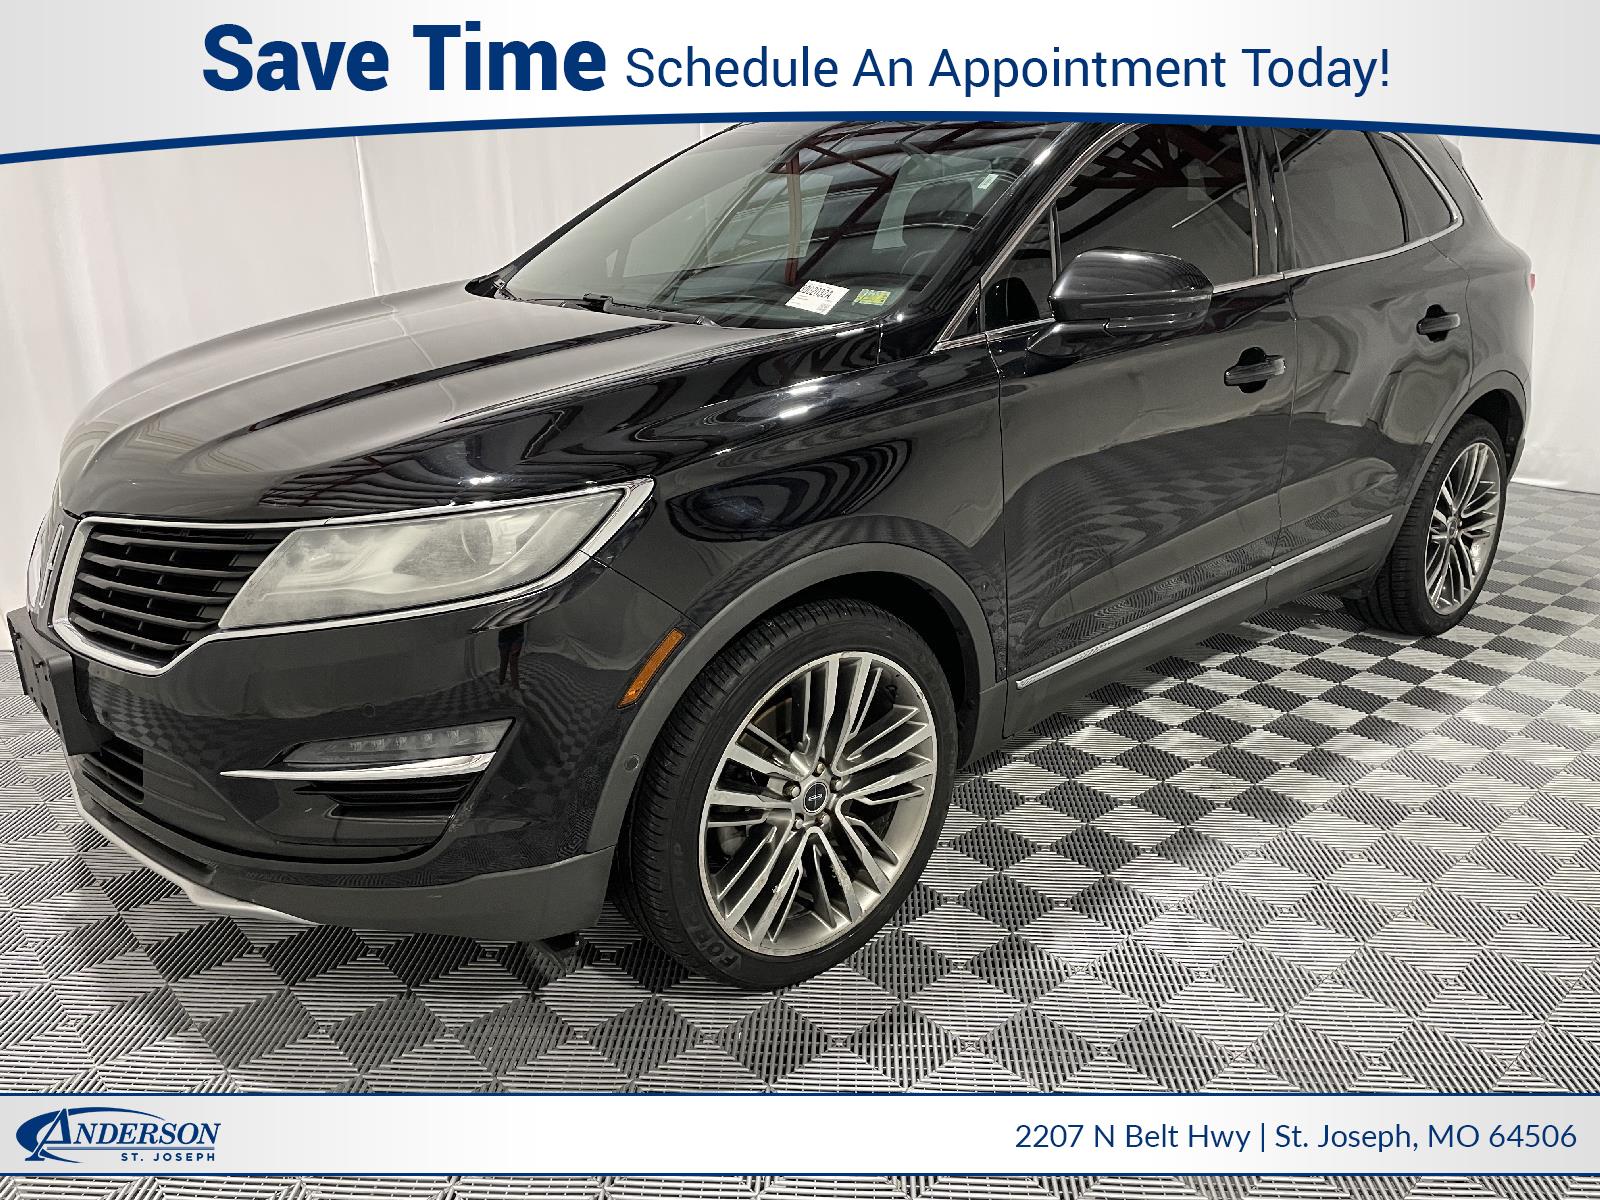 Used 2016 Lincoln MKC Black Label Stock: 3002032A